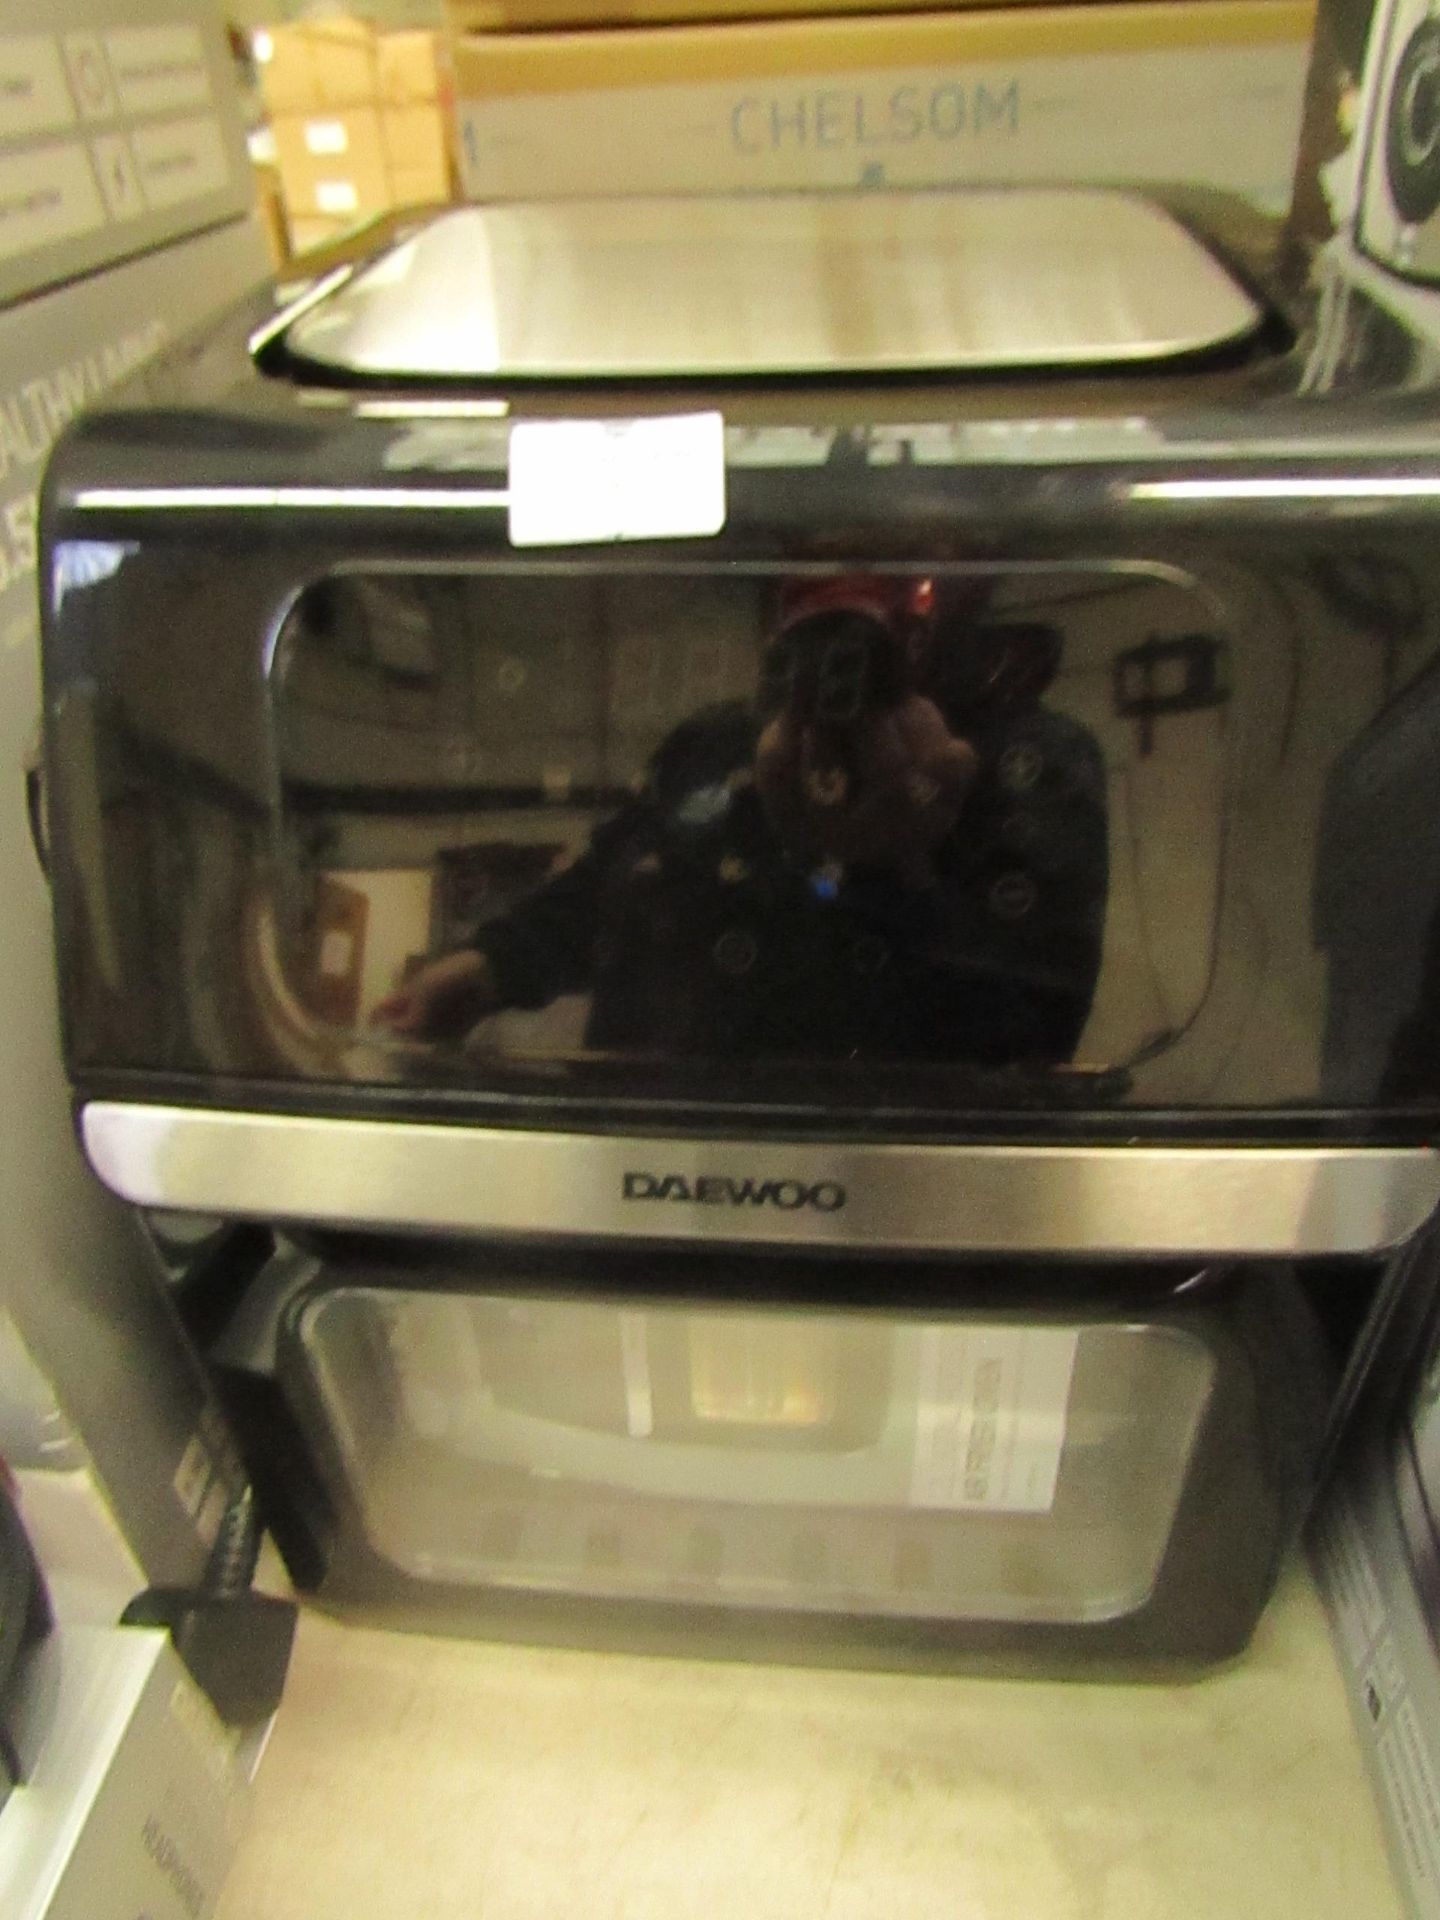 1X Daewoo 12L Digital Rotisserie Air Fryer Oven, Powers On When Tested, But Have Not Tested Item Any